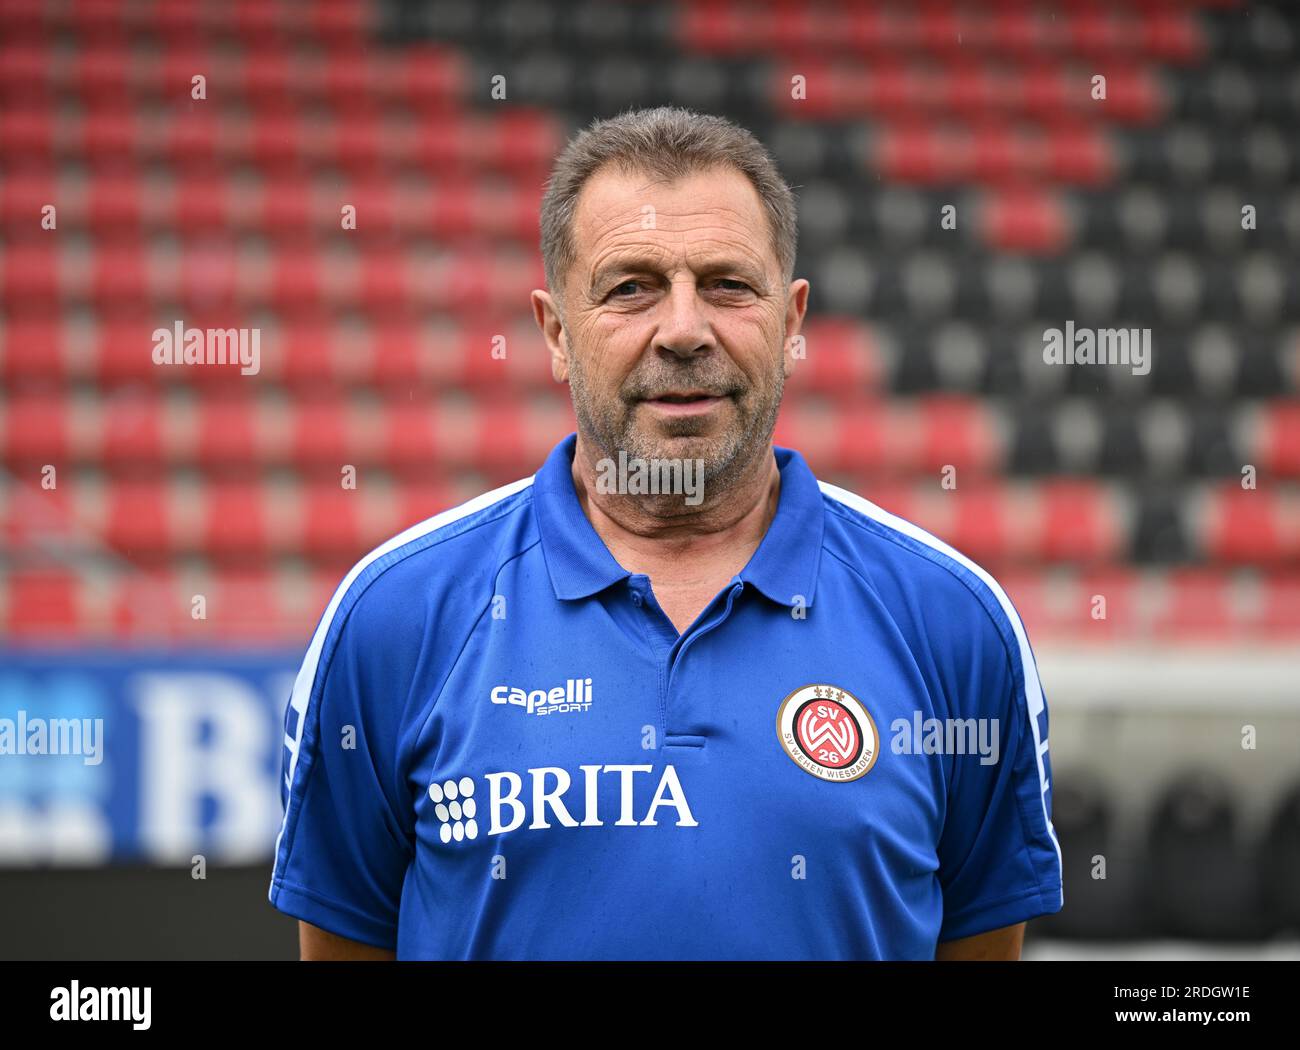 Wiesbaden, Germany. 21st July, 2023. Soccer, 2. Bundesliga, season 2023/24, photo session SV Wehen Wiesbaden in the Brita-Arena. Gerhard Eckl (coach). Credit: Arne Dedert/dpa - IMPORTANT NOTE: In accordance with the requirements of the DFL Deutsche Fußball Liga and the DFB Deutscher Fußball-Bund, it is prohibited to use or have used photographs taken in the stadium and/or of the match in the form of sequence pictures and/or video-like photo series./dpa/Alamy Live News Stock Photo